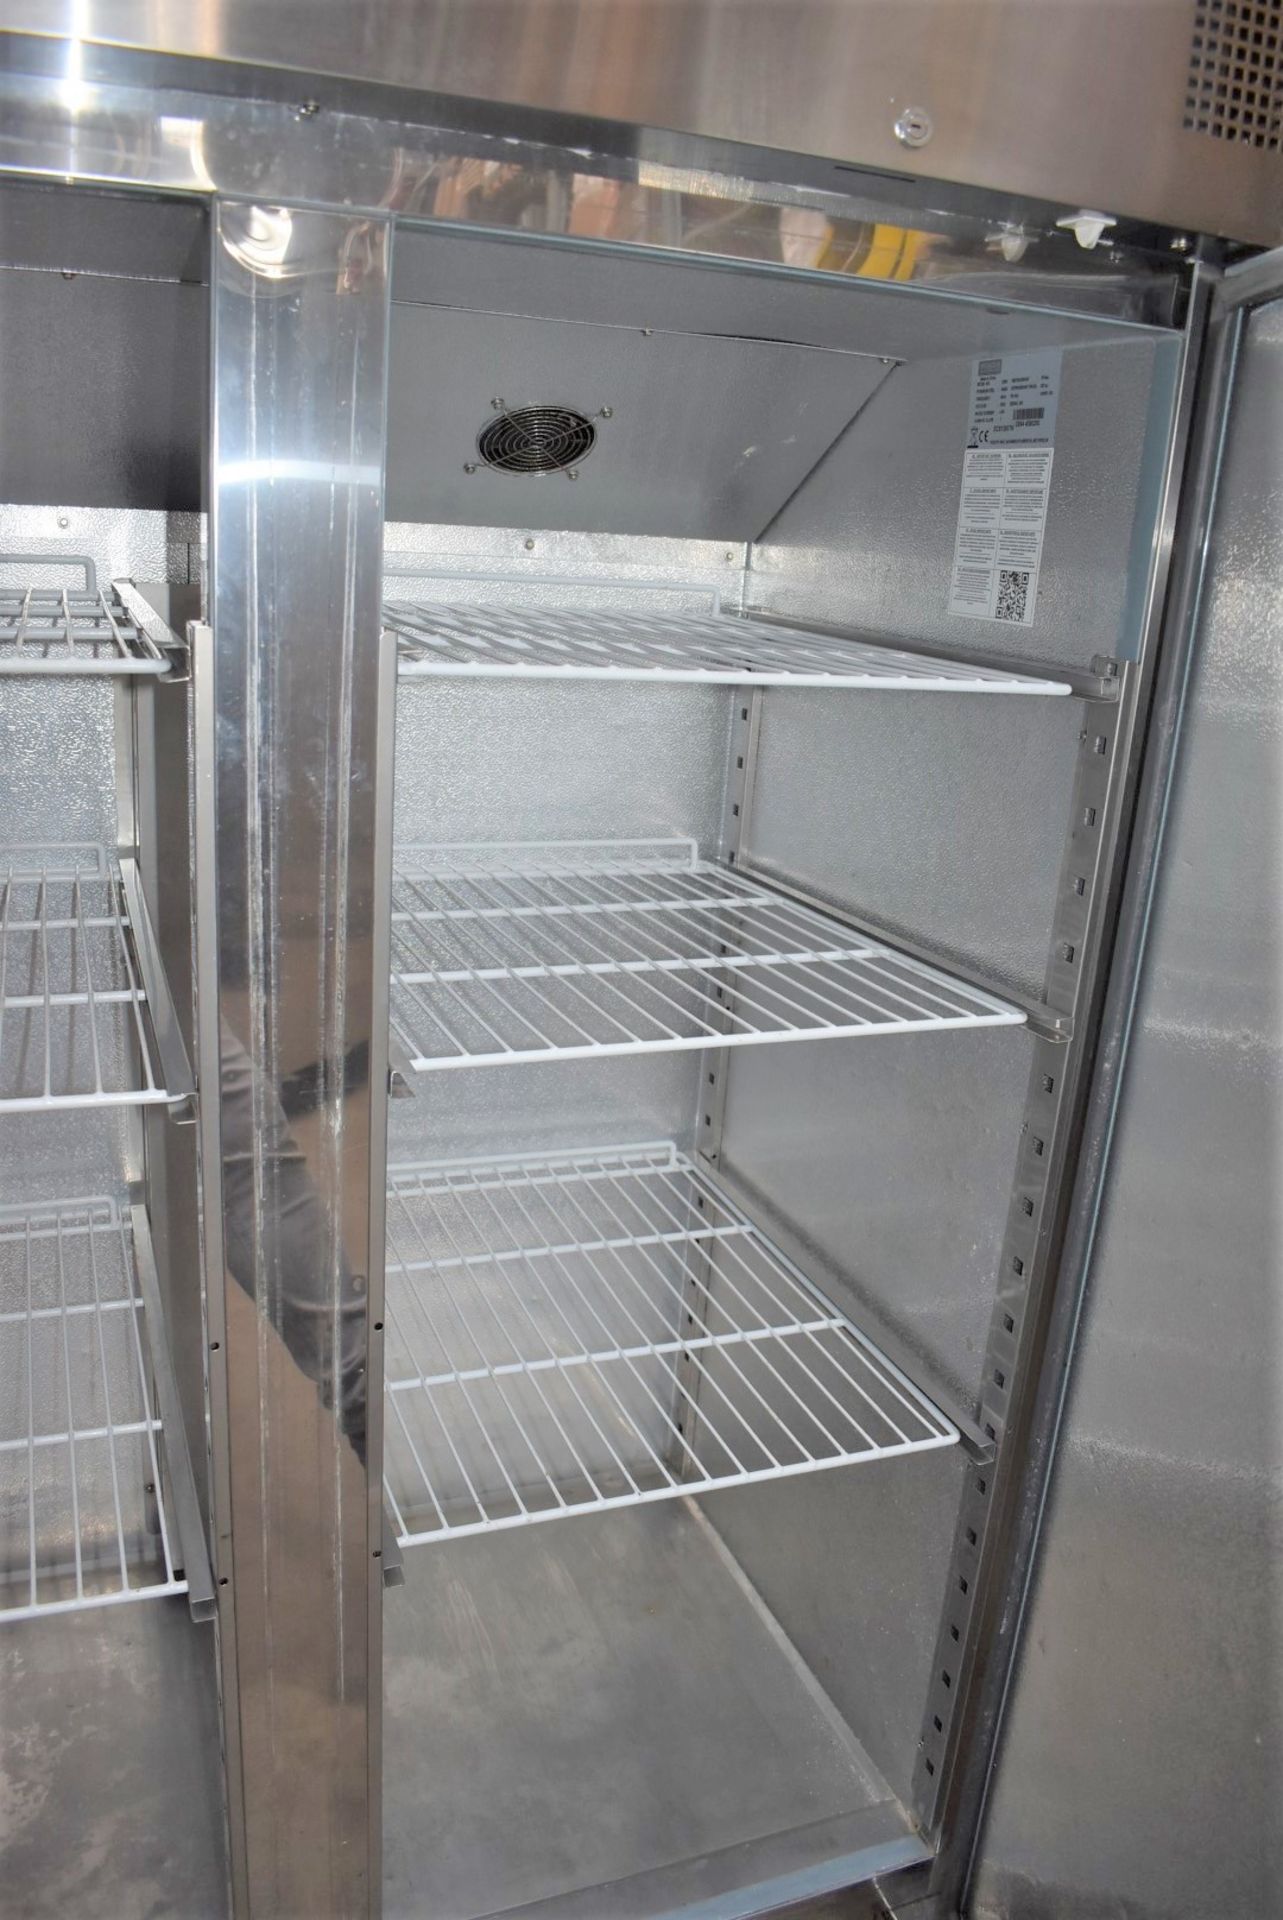 1 x Polar G Series Upright Double Door Refrigerator - Model G594 - Complete With Internal - Image 11 of 18